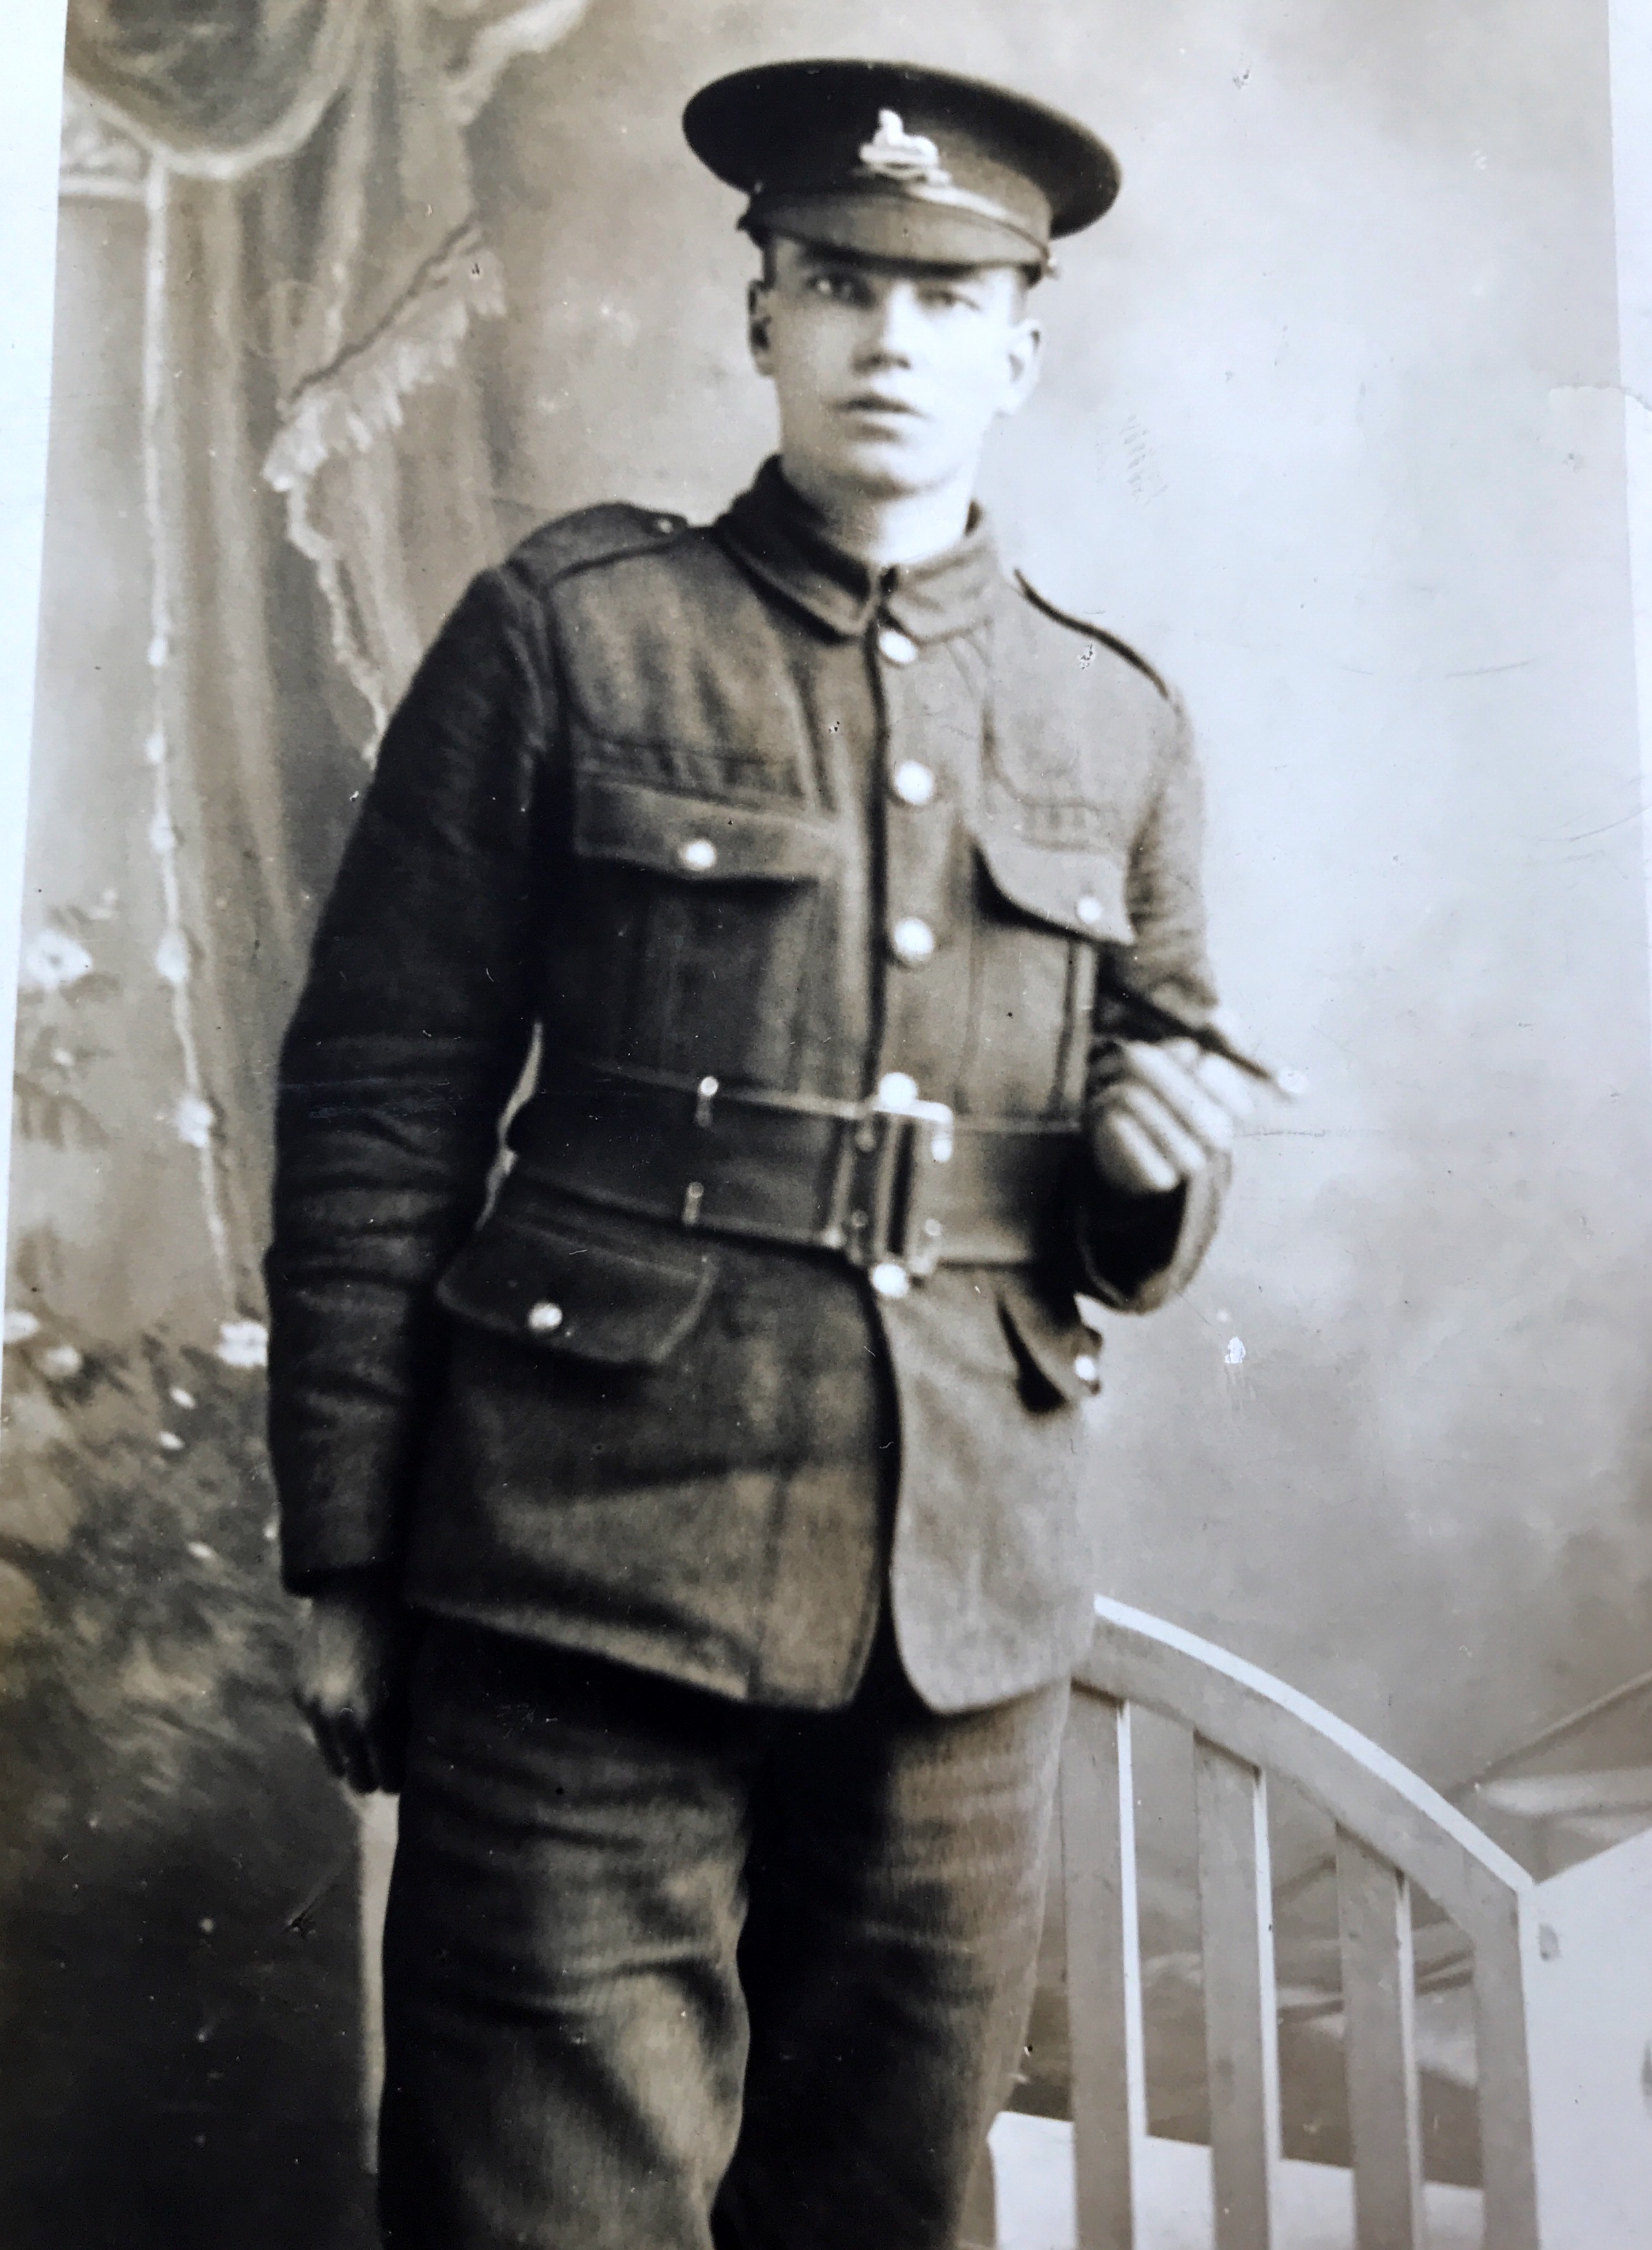 Son of Albert Edward and Emily White. Killed in action 1915